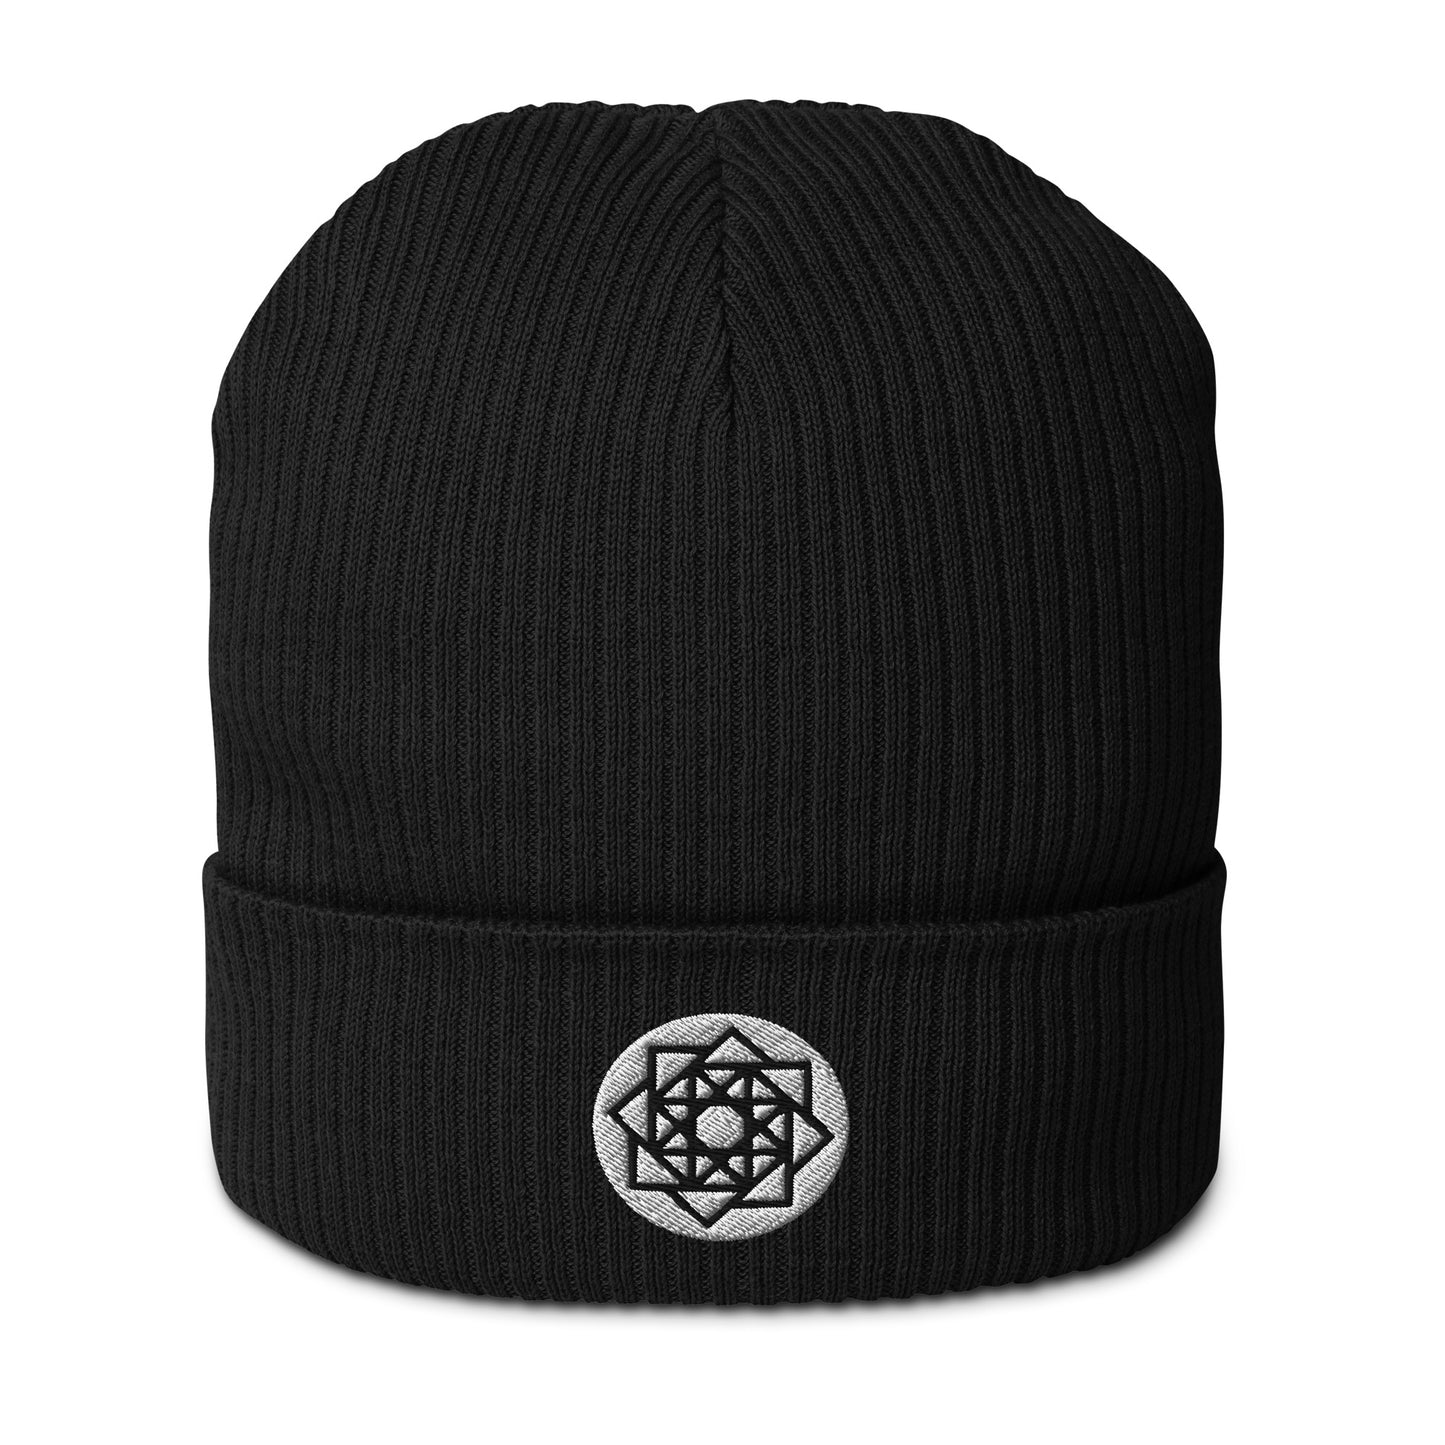 Allow me to introduce our Square Matrix Beanie in Midnight Black, a testament to cosmic order and mathematical elegance. Woven from the finest organic cotton and adorned with the precise geometry of the Square Matrix symbol, this beanie transcends mere headwear.